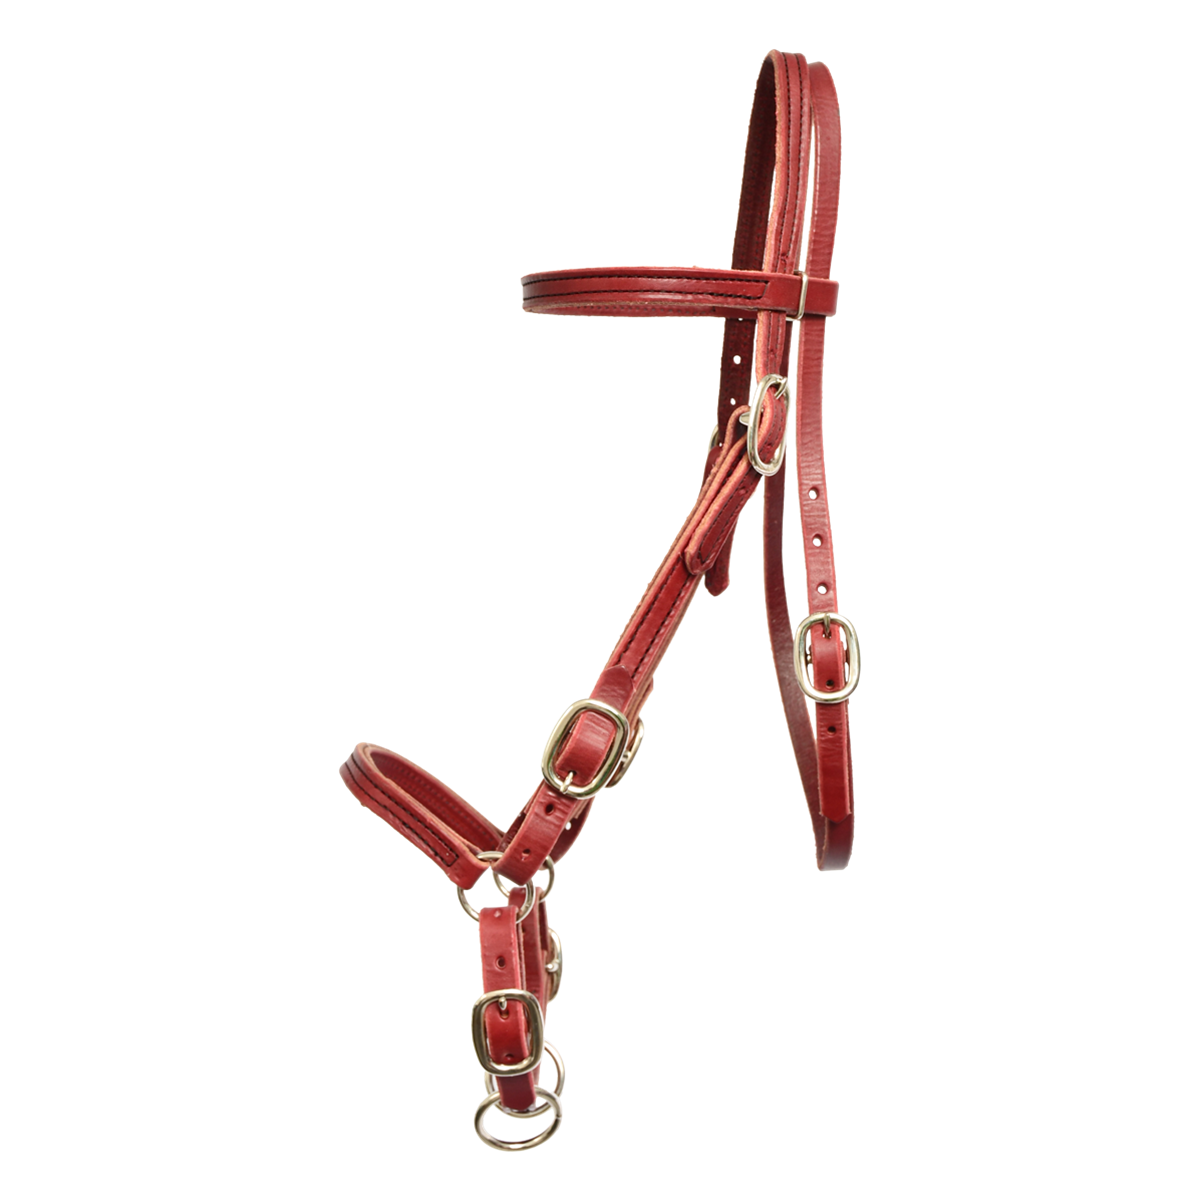 Buy 2 in 1 Bitless Bridle Made from Leather From Two Horse Tack